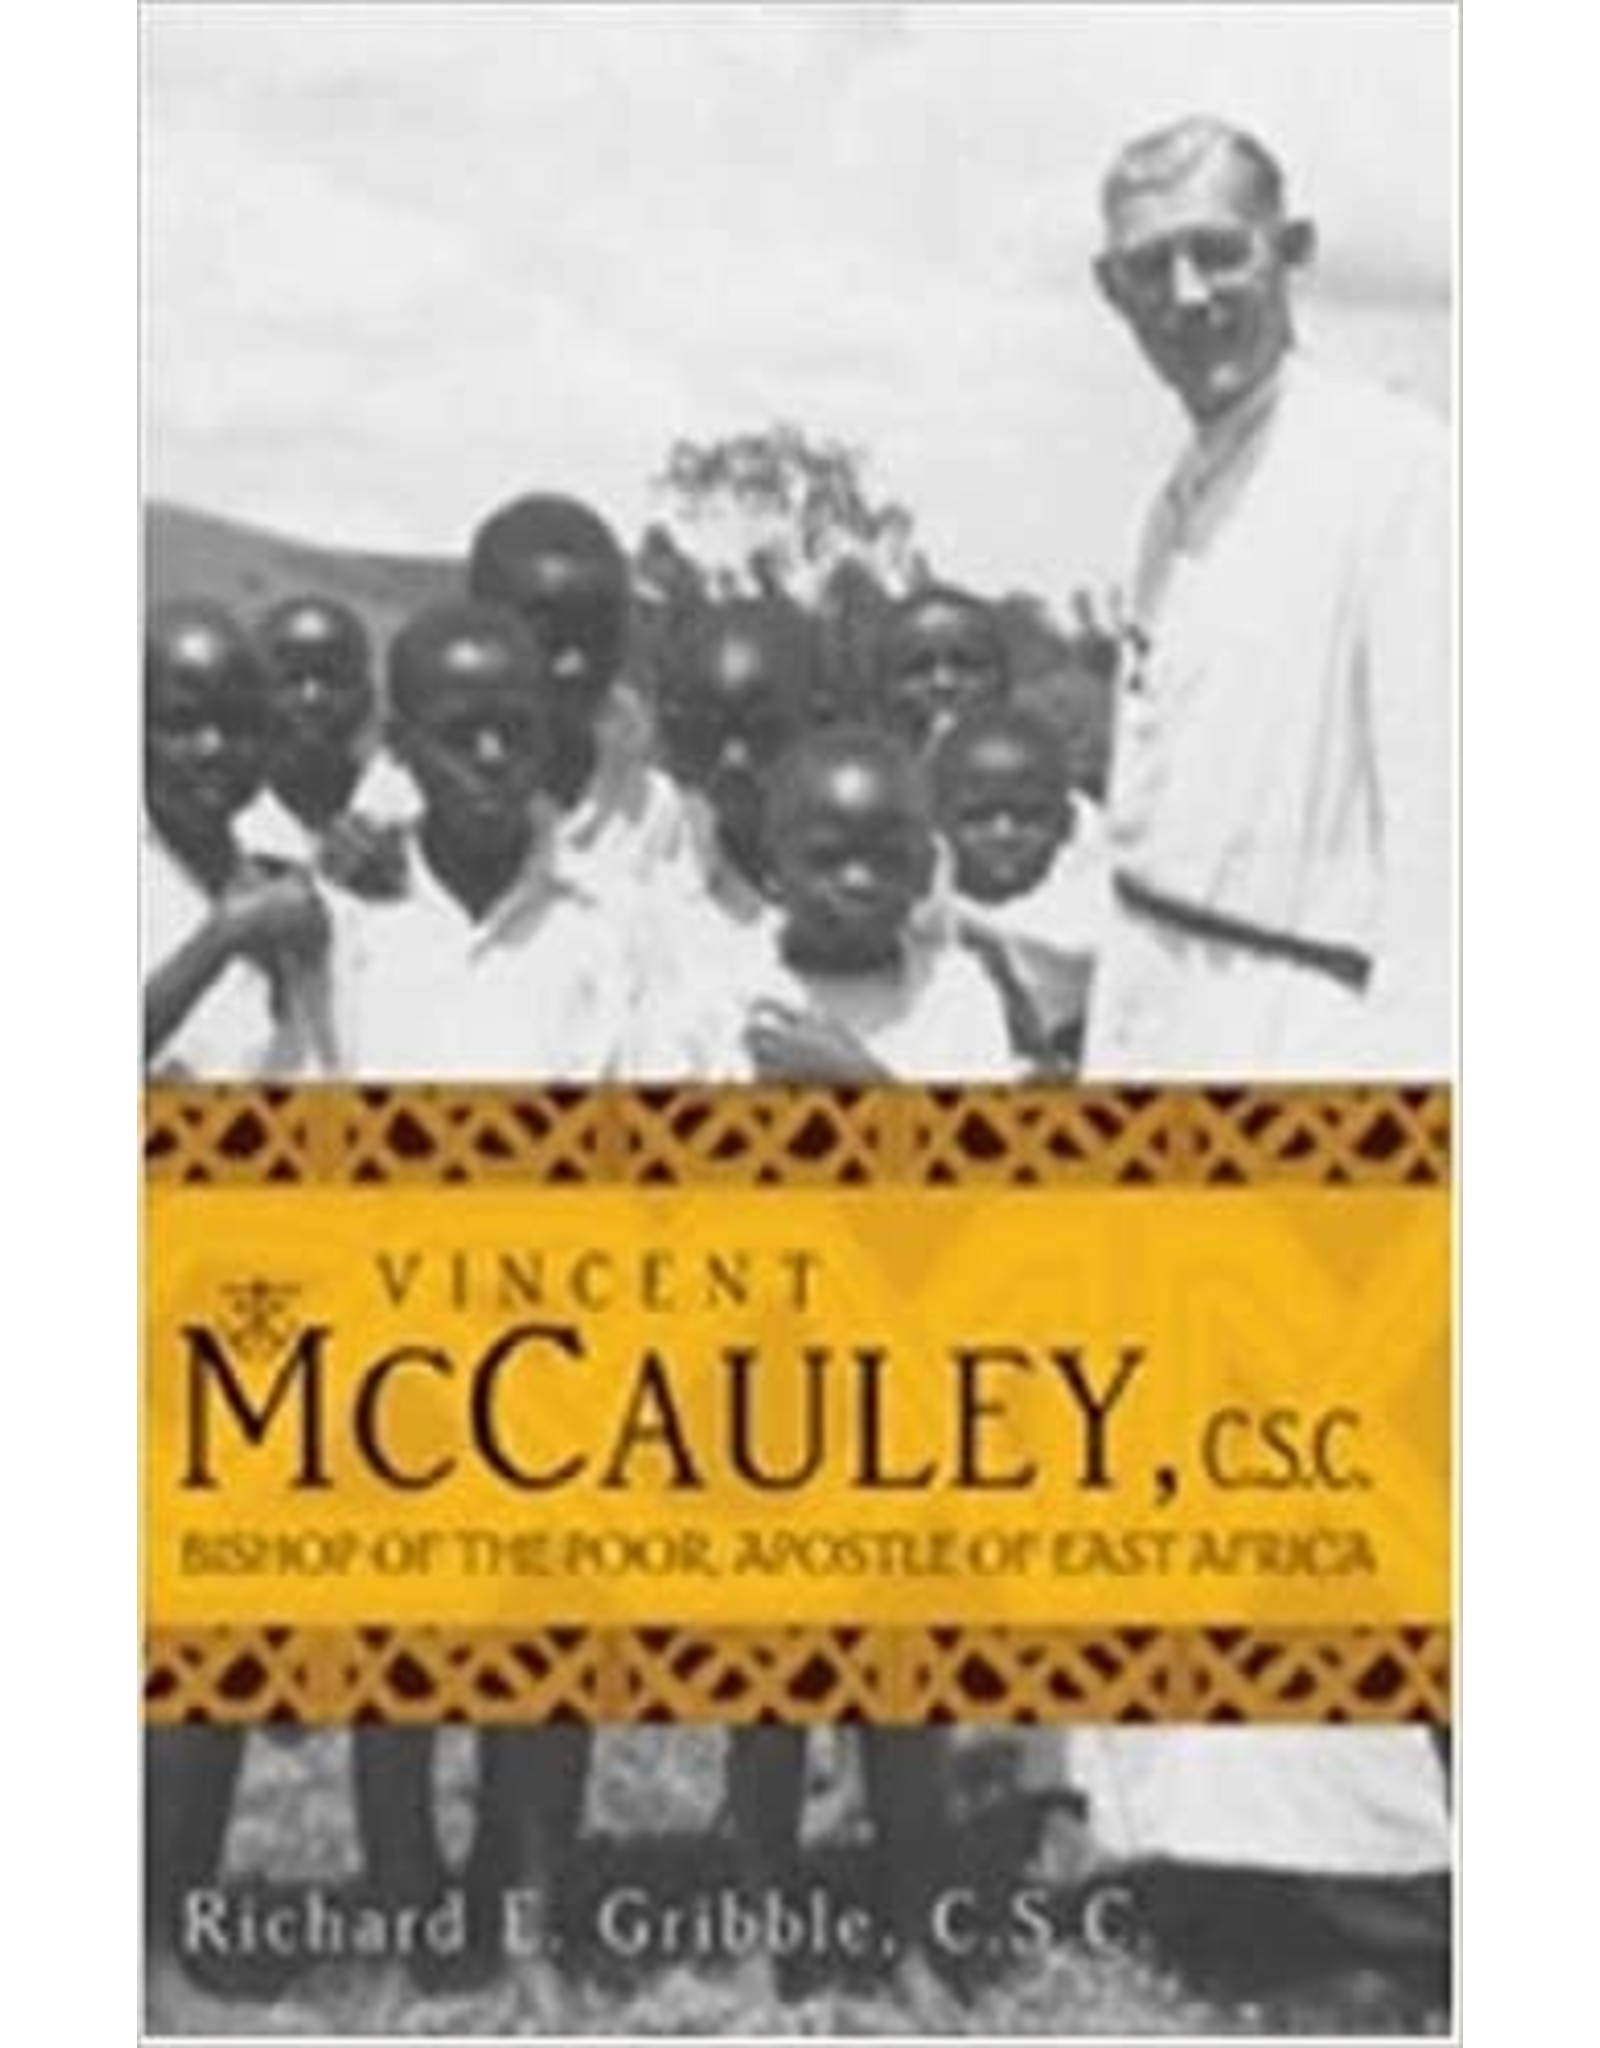 Ave Maria Vincent McCauley, C.S.C.: Bishop of the Poor, Apostle of East Africa